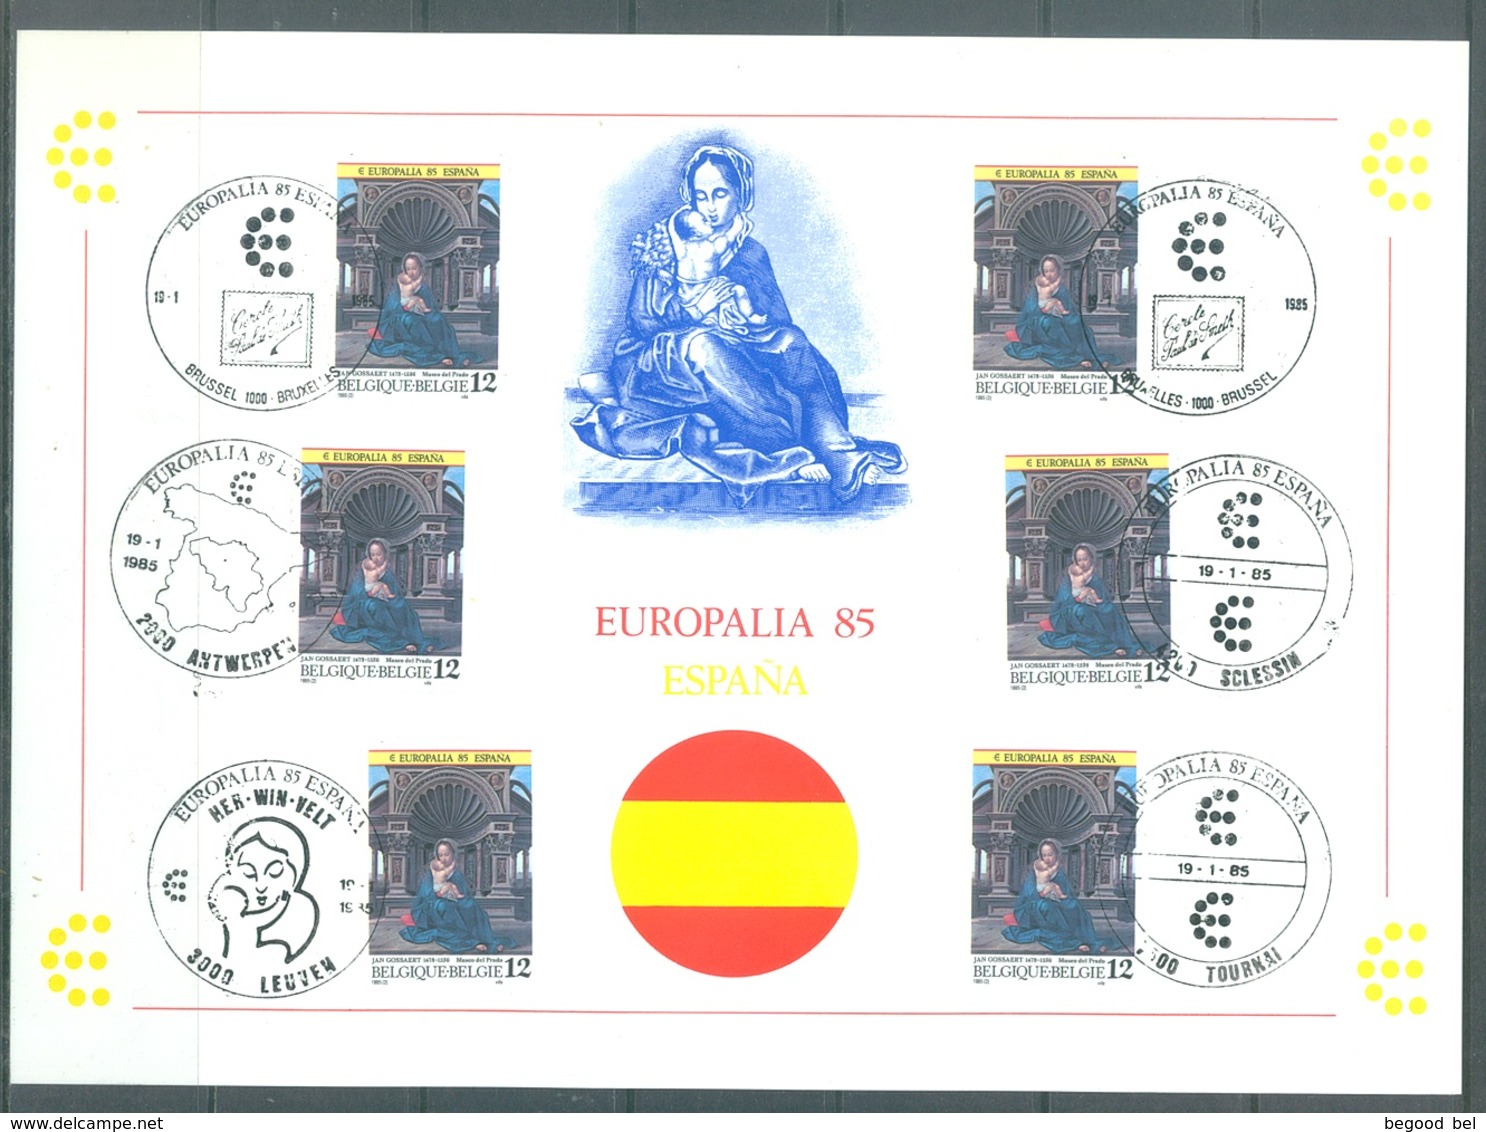 BELGIUM - 19.1.1985 - FDC - EUROPALIA - COB 2157 - Lot 19946 - OUT OF SIZE SENDING TARIF UP TO 100Gr - 1981-1990